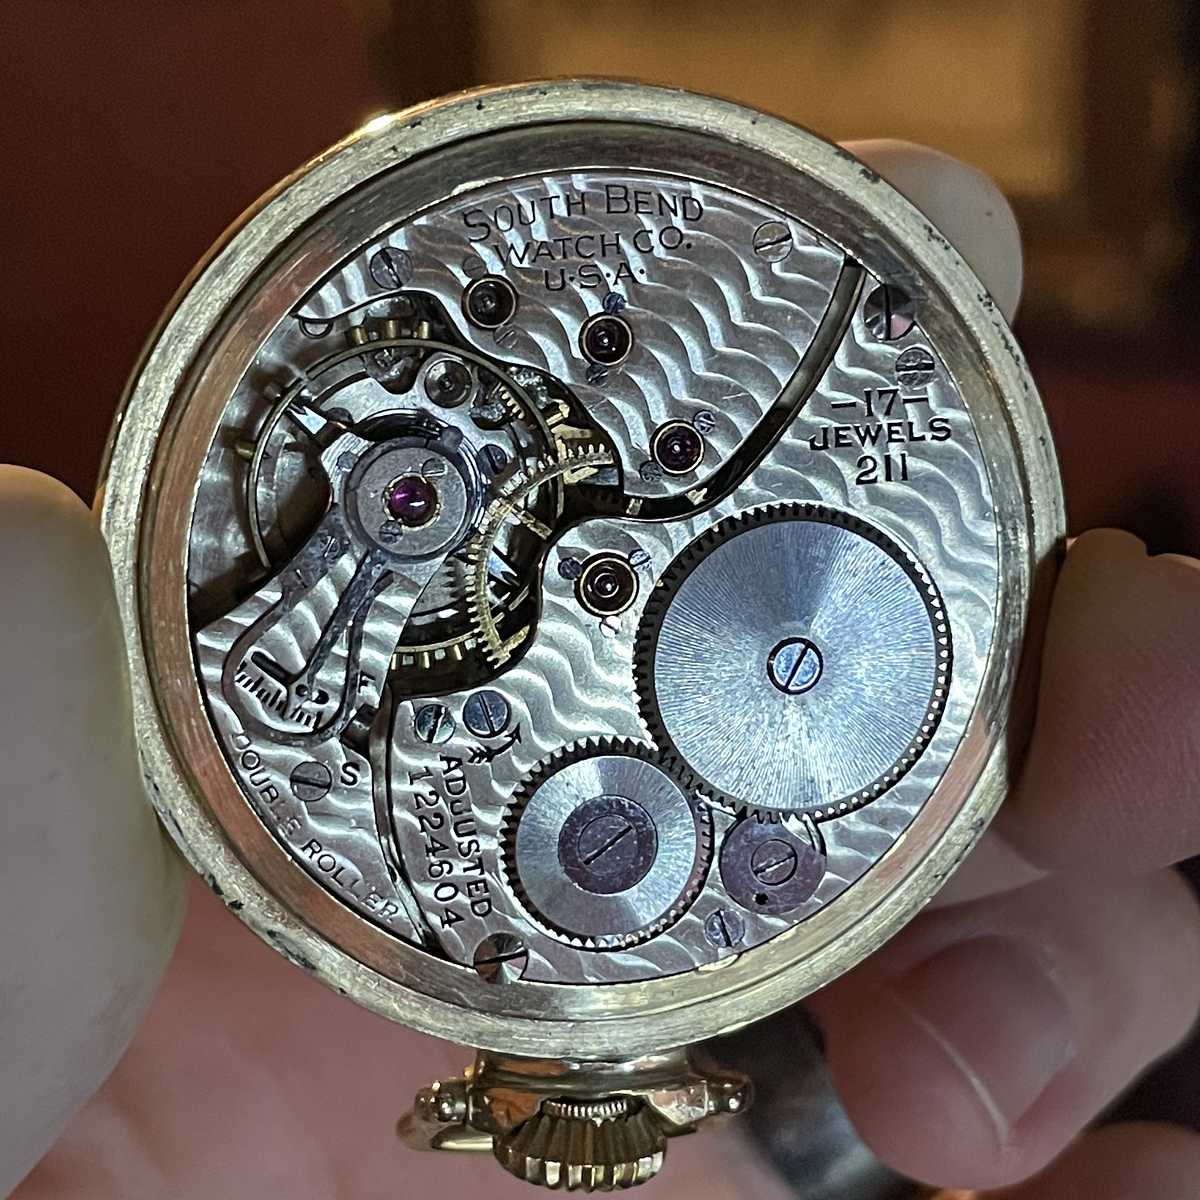 1928 South Bend Watch Grade 211 Movement in pocket watch case